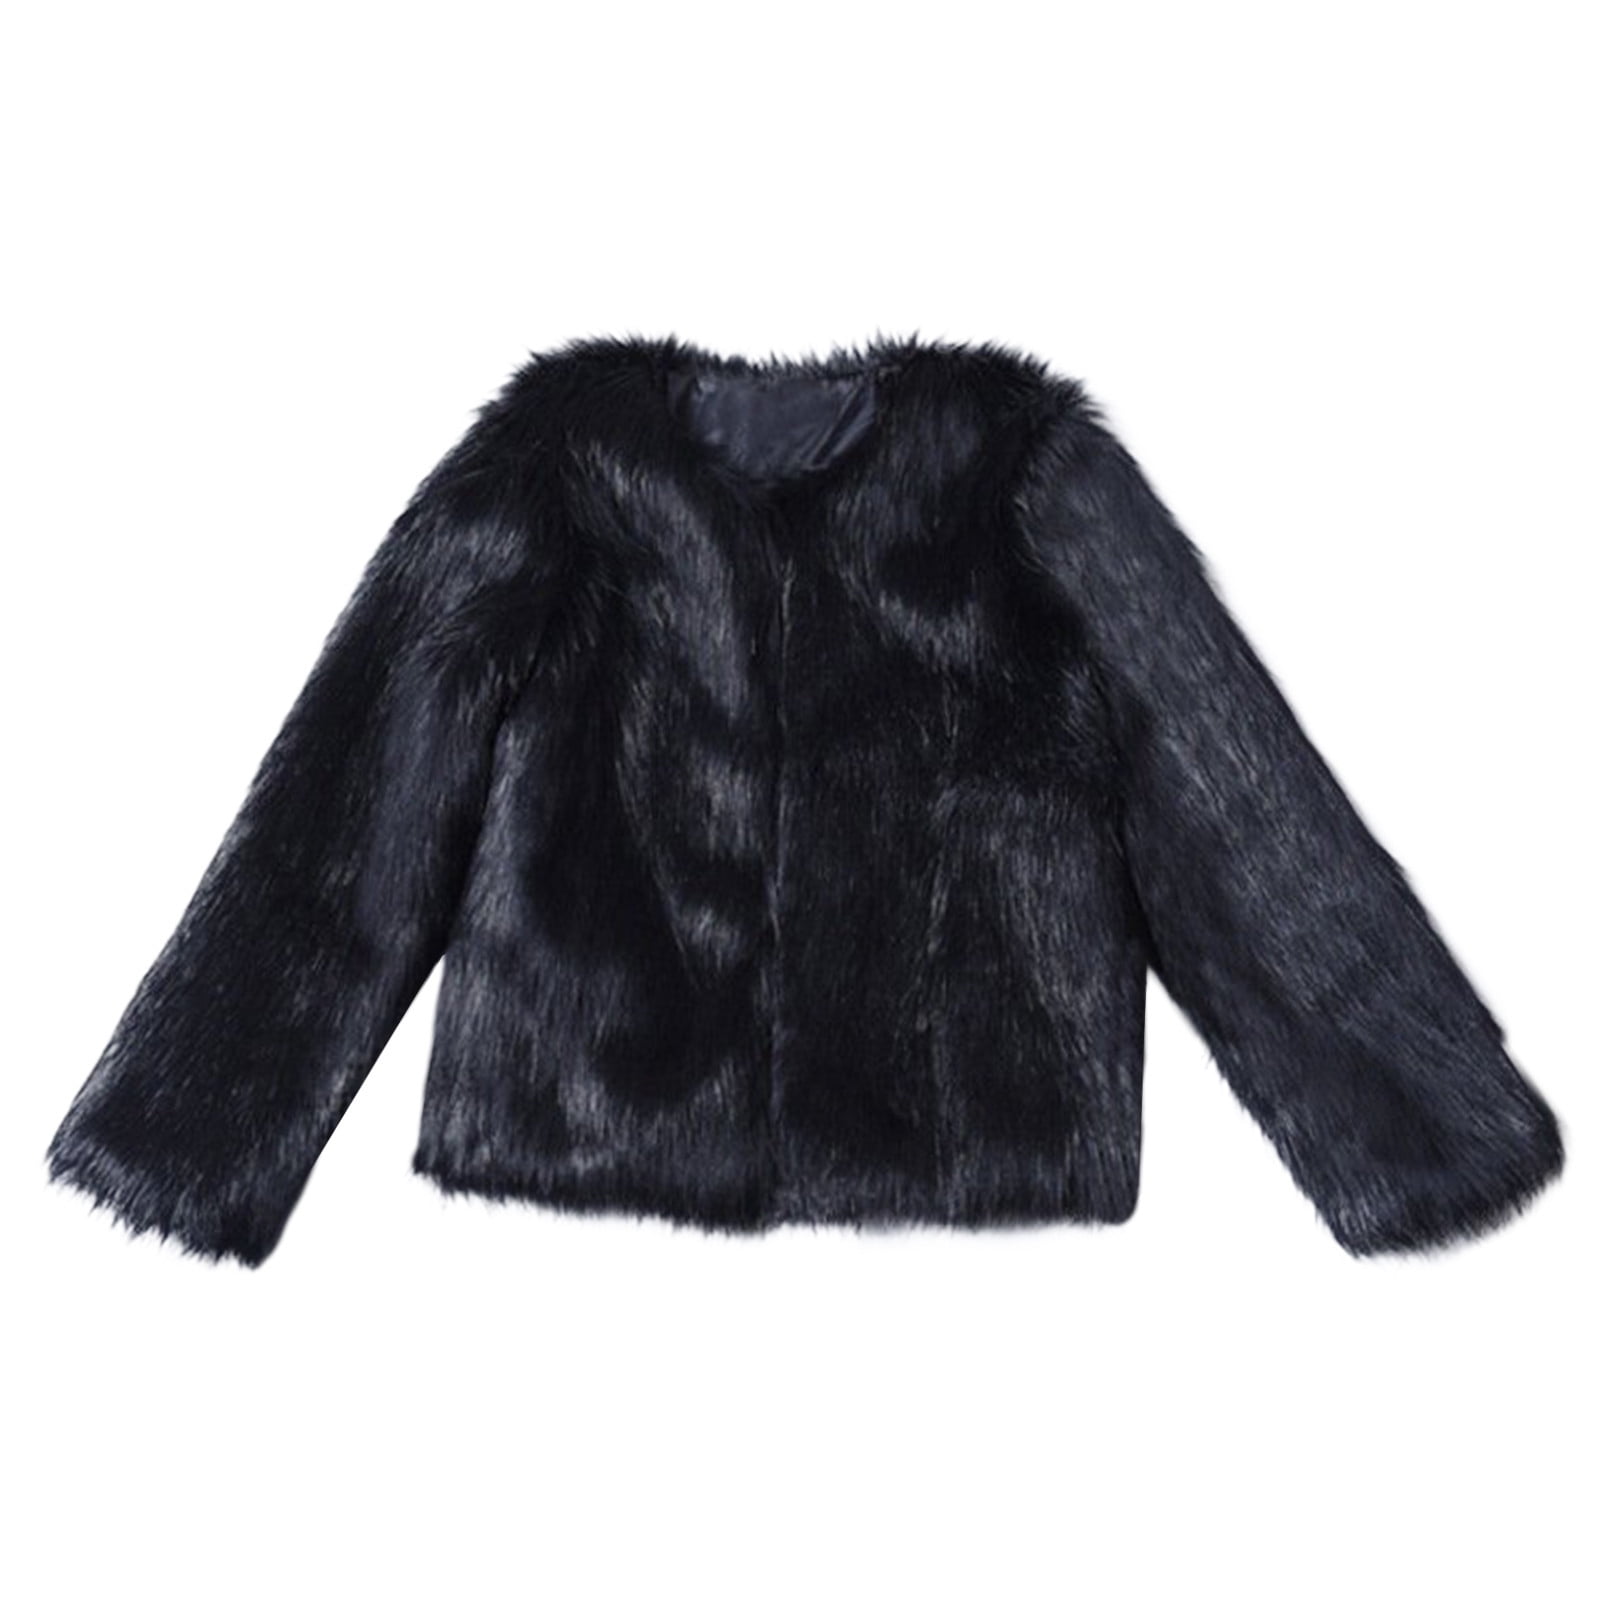 Clearance Faux Furry Coats for Women Winter Thick Warm Fuzzy Fluffy ...